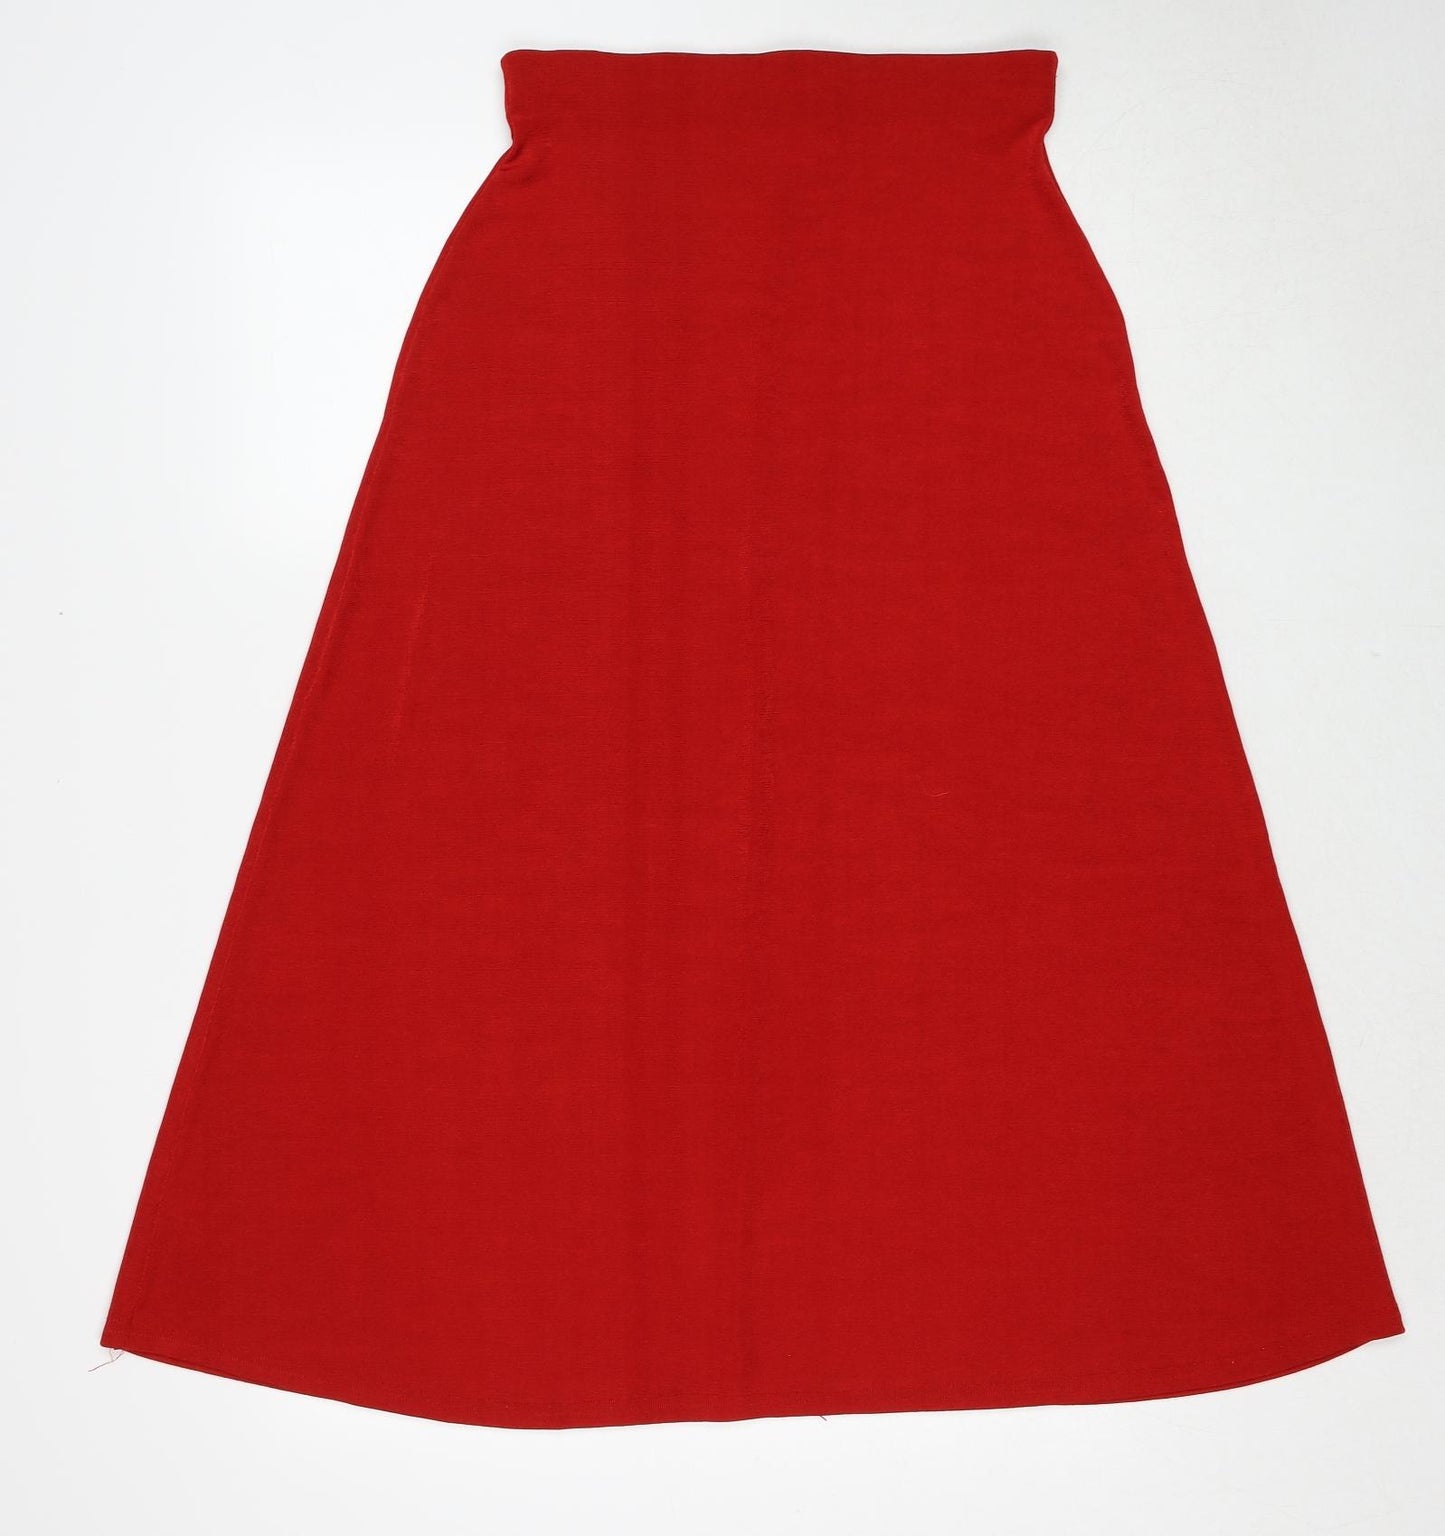 Richards Womens Red Polyester Swing Skirt Size M